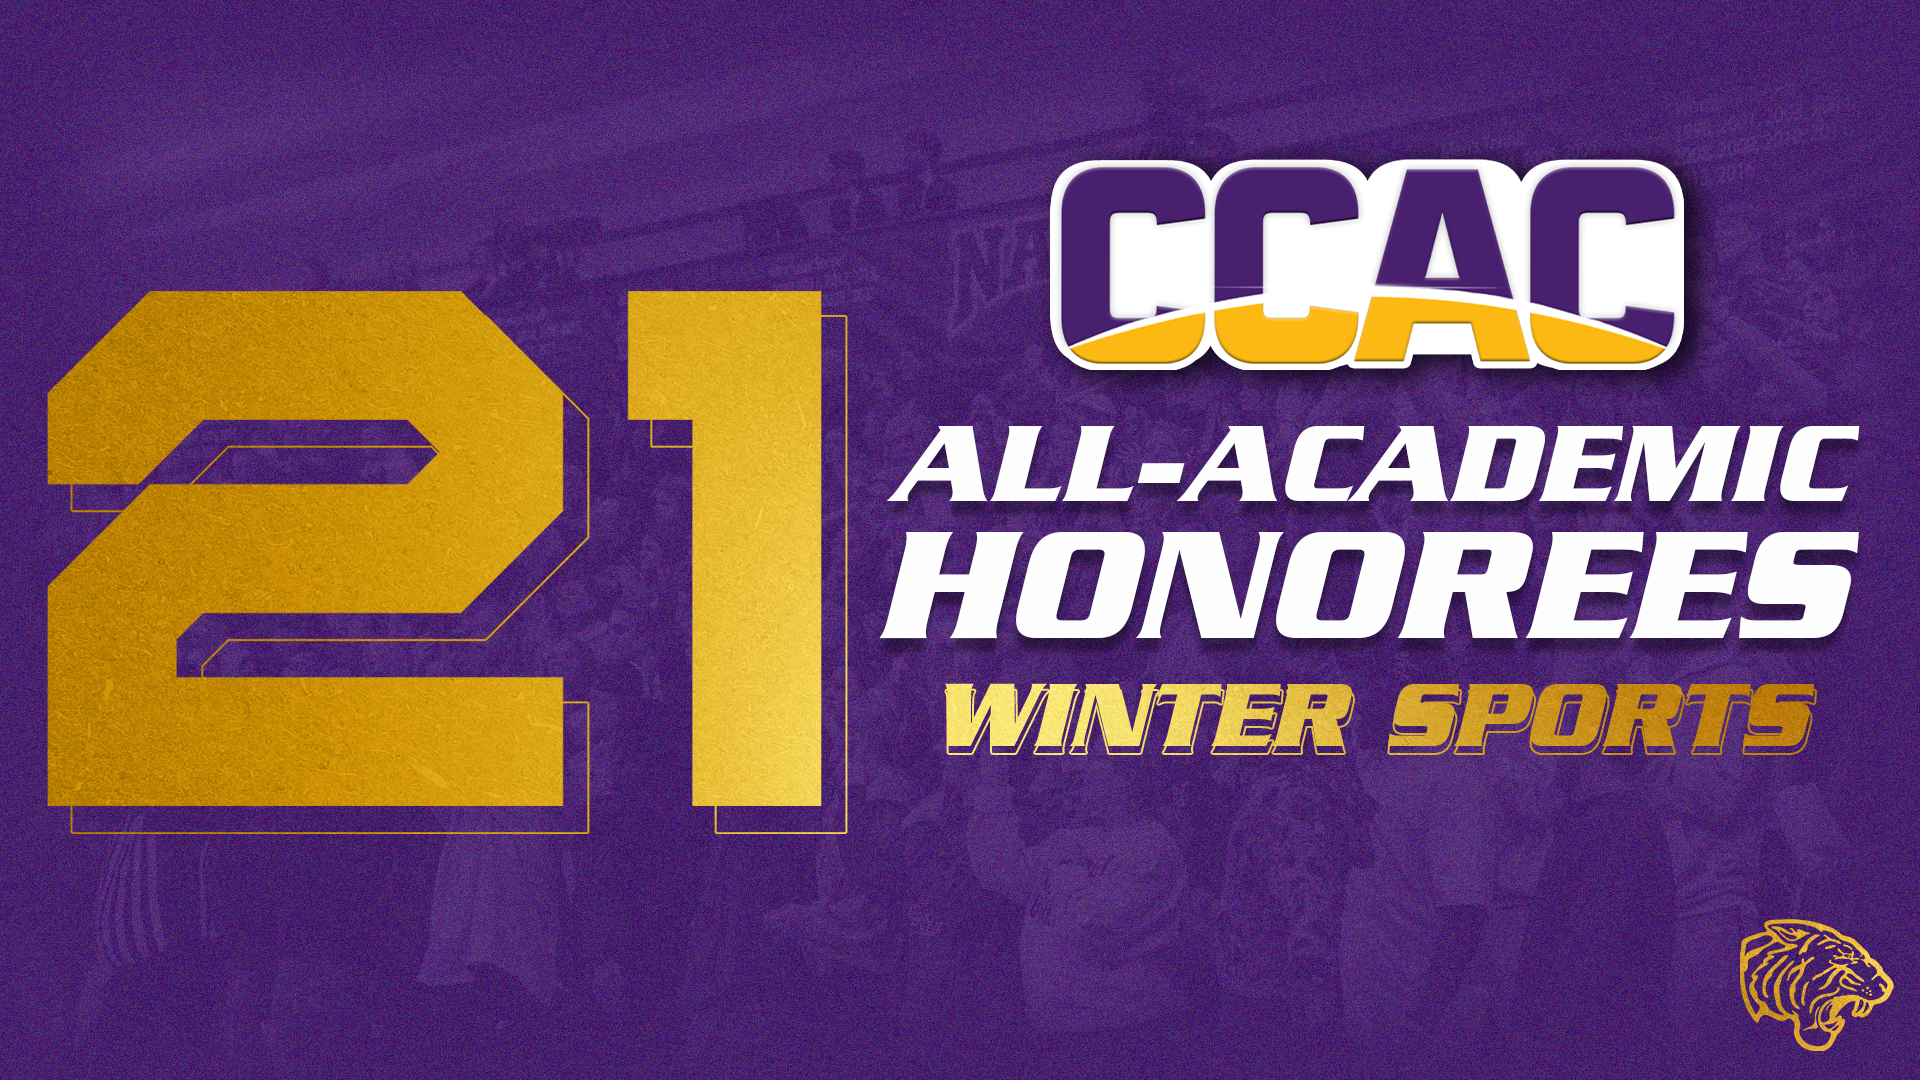 ONU BASKETBALL PROGRAMS BOAST TOP NUMBERS ON CCAC WINTER ACADEMIC HONOR ROLL